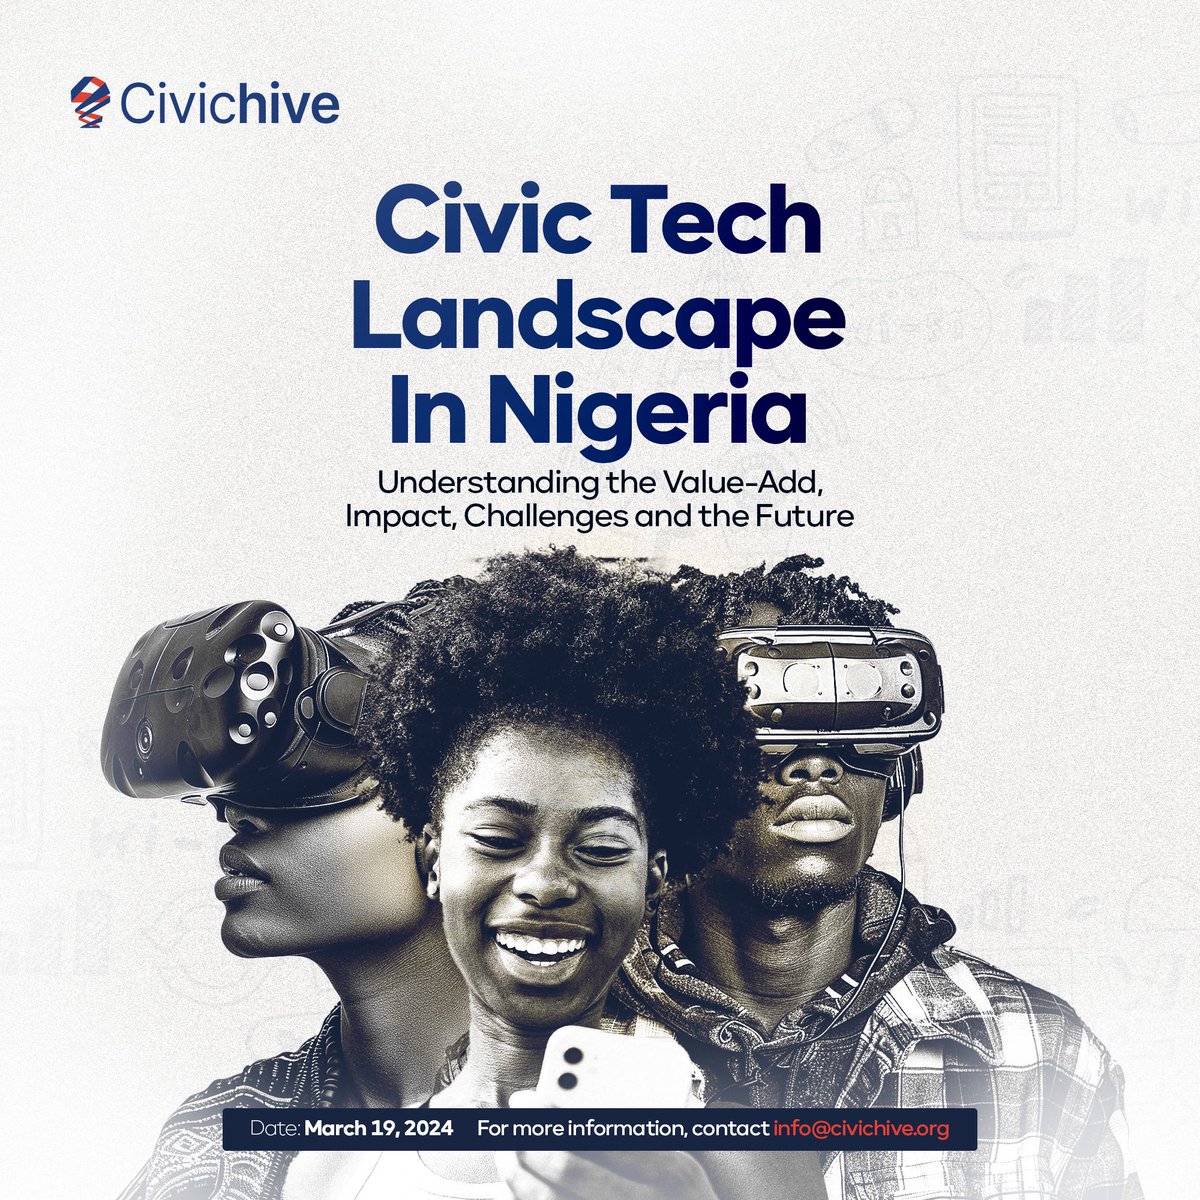 Our CivicTech Landscape Research is ready! 📡 🚀 Join us for unveiling of our groundbreaking report on 'CivicTech Landscape in Nigeria’, as we dive deep into the value-add, impact, challenges, and roadmap to the future. Stay tuned for insights that will shape the course of…